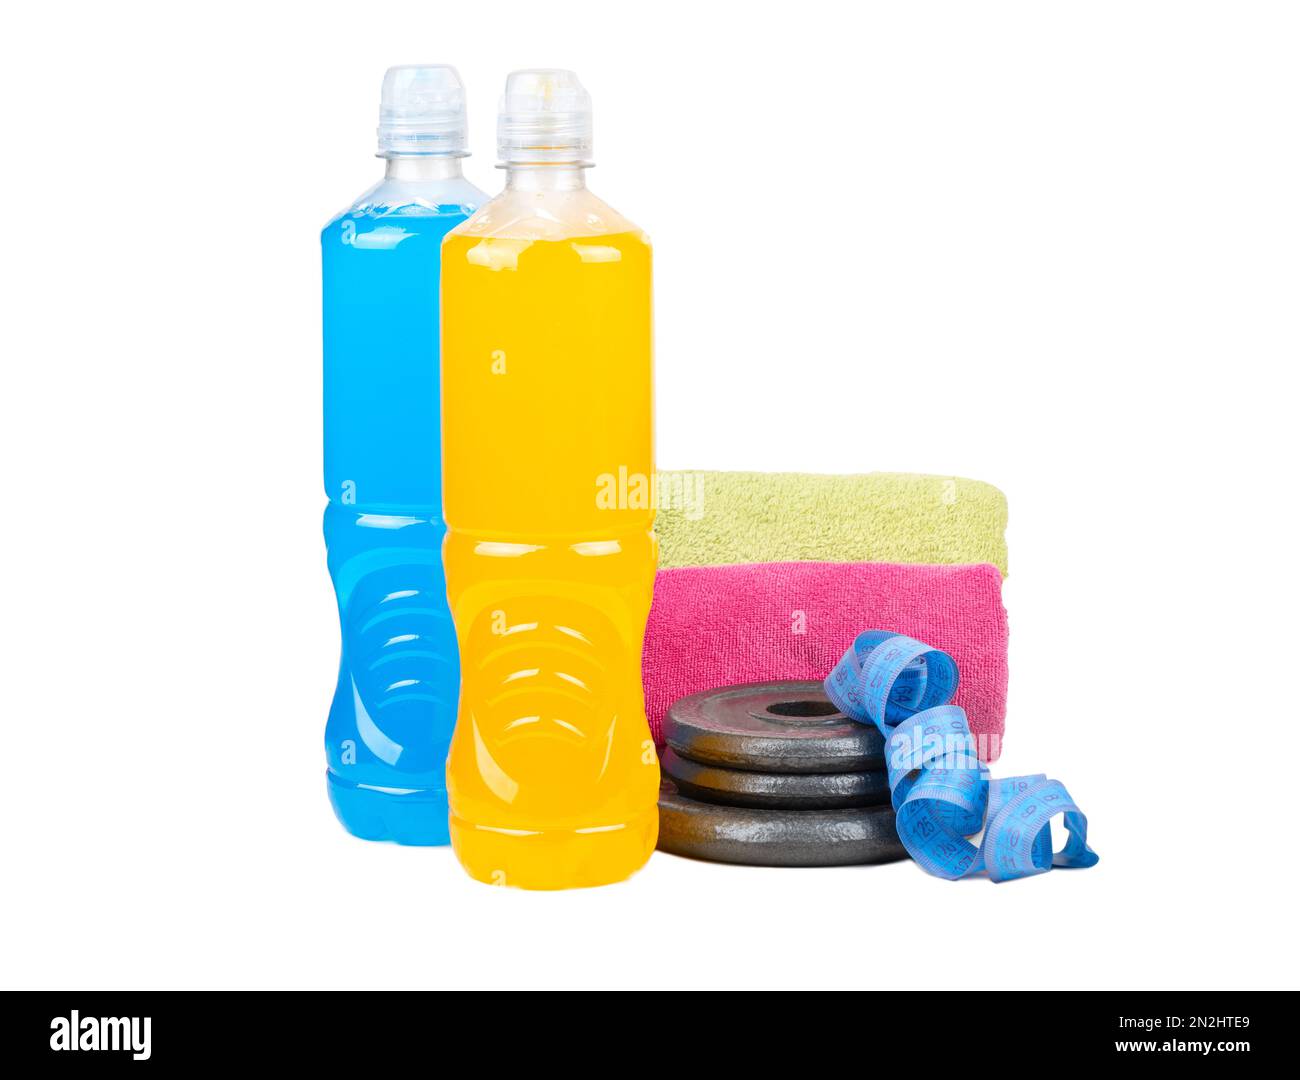 https://c8.alamy.com/comp/2N2HTE9/plastic-bottles-with-blue-and-orange-isotonic-drinks-with-dumbbell-pancakes-a-measuring-centimeter-and-two-towels-on-a-white-background-2N2HTE9.jpg